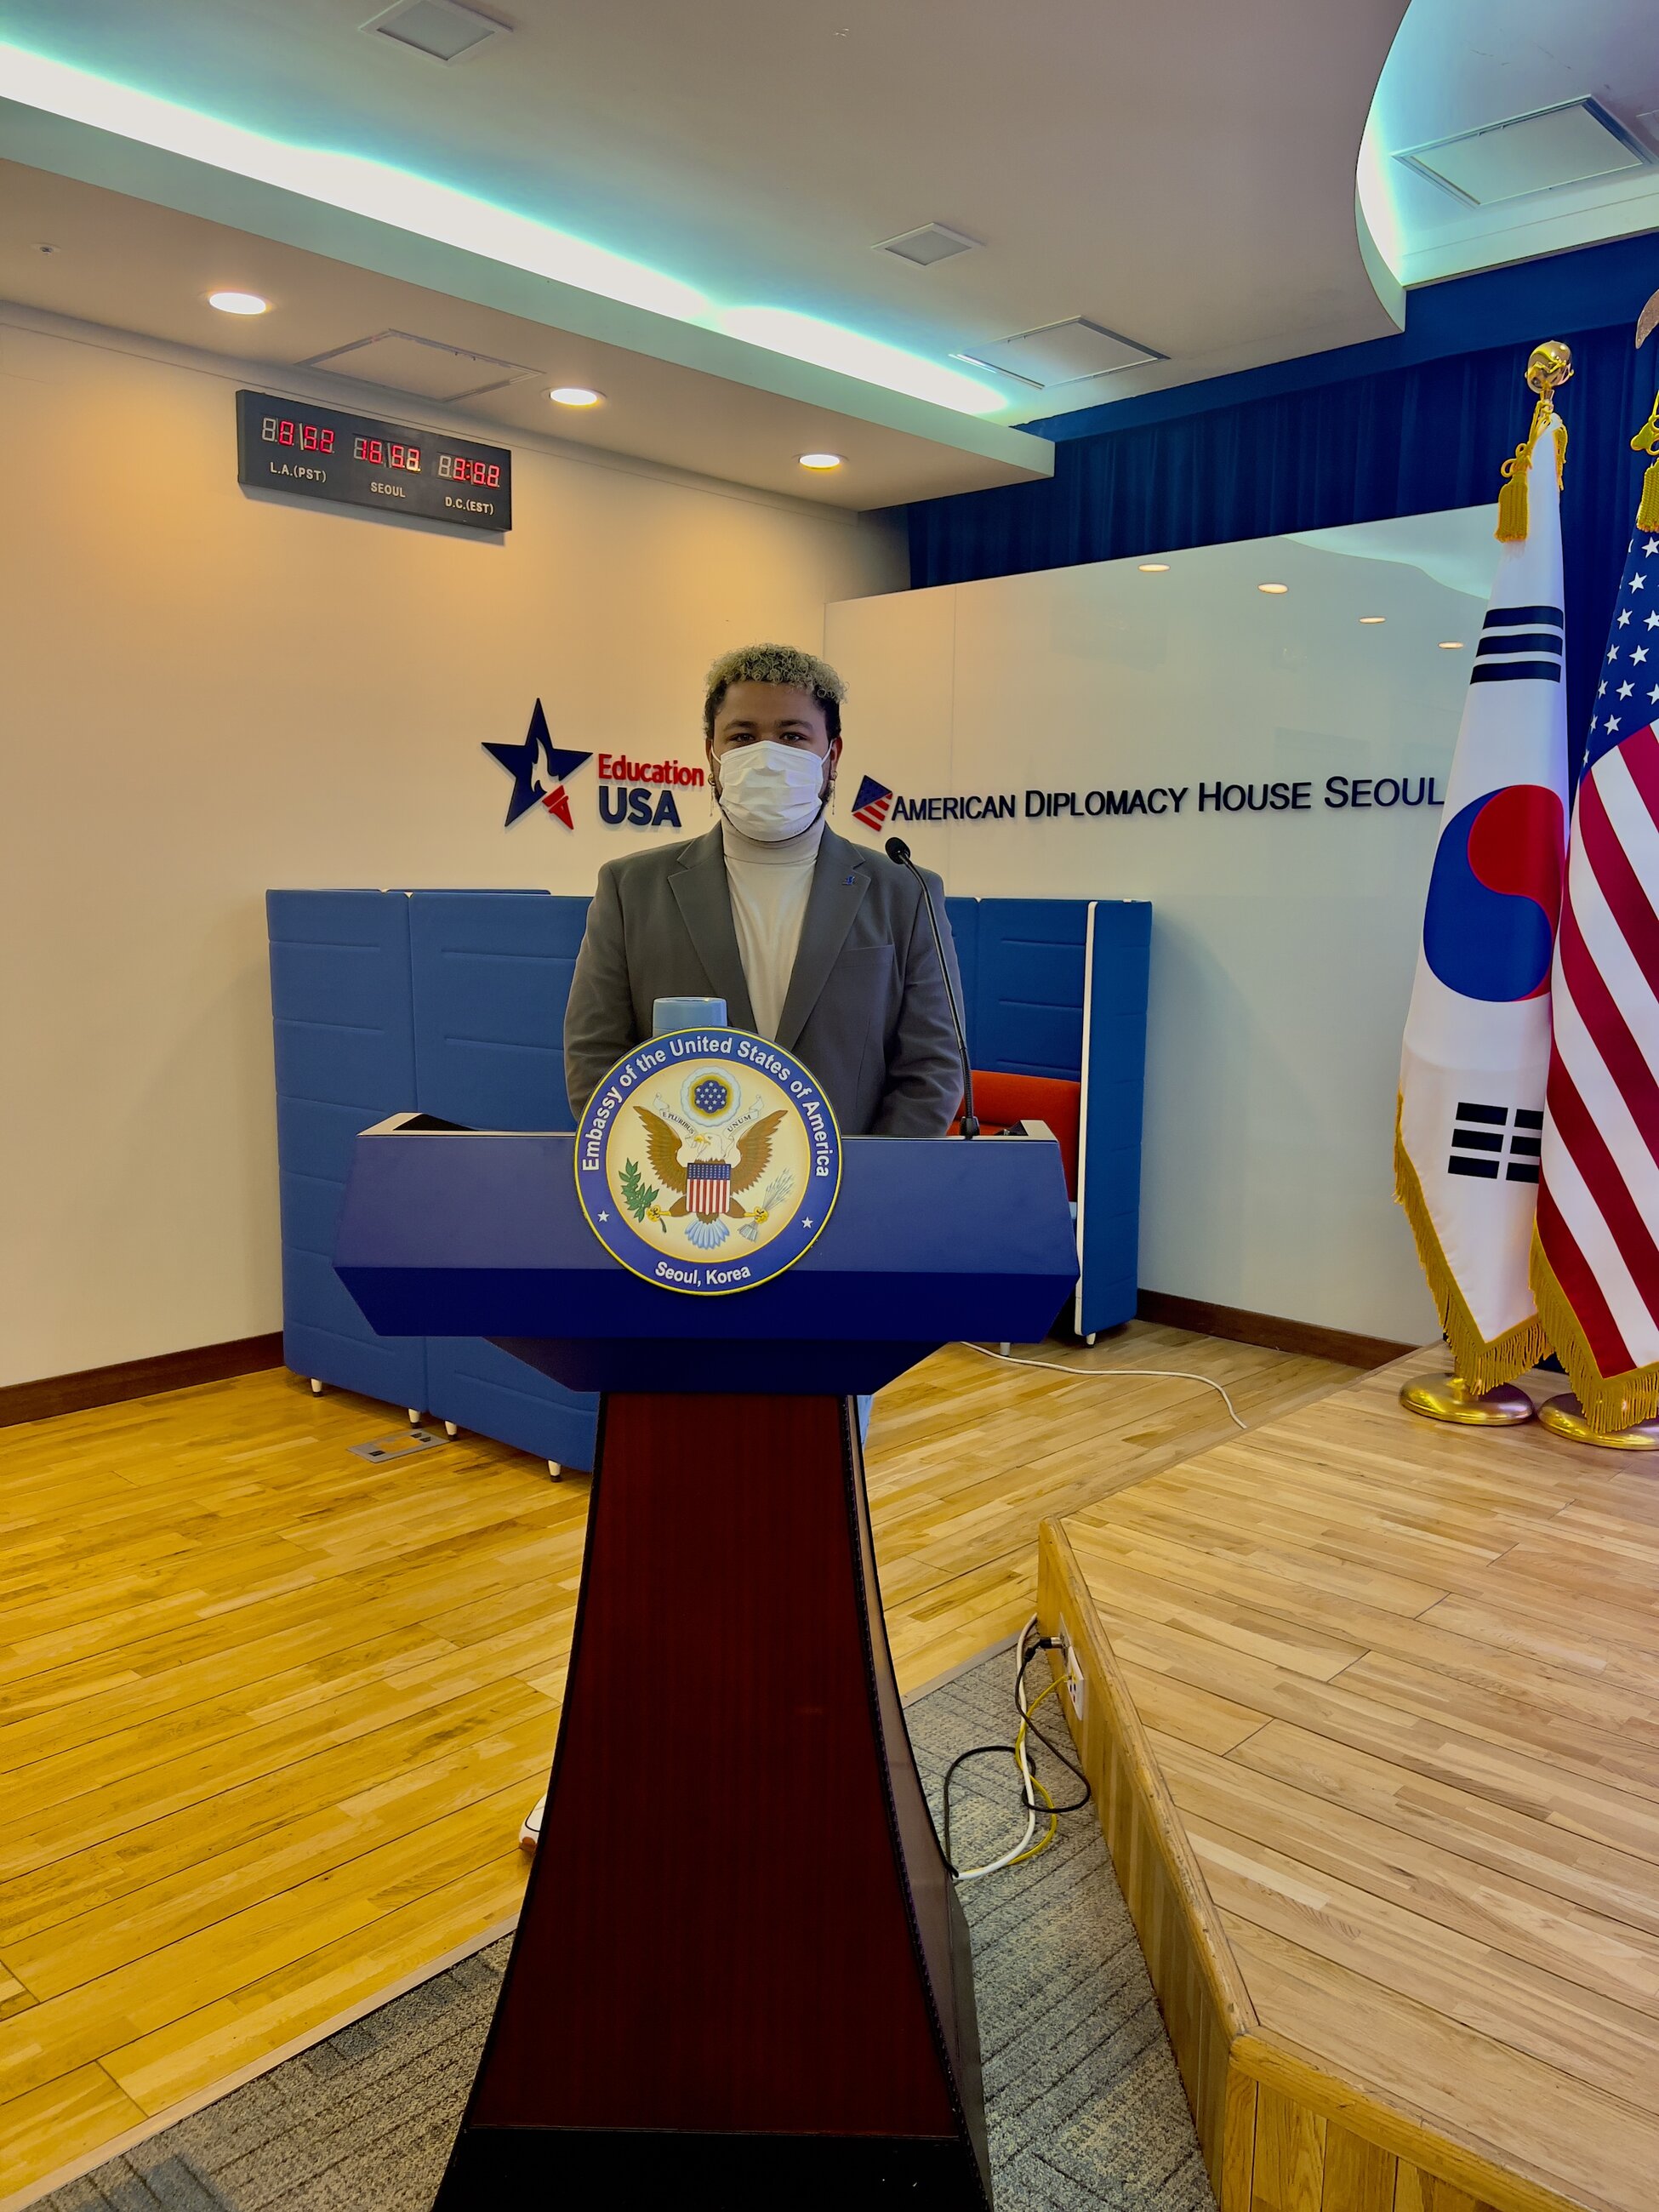 As a Benjamin A. Gilman Scholar, I had the privilege of visiting the Public Diplomacy Section at the US Embassy Seoul, joining fellow scholars for insightful discussions. The session covered topics such as US Government career opportunities, safety and security in Korea, and provided a unique opportunity to engage in direct conversations with Foreign Service Officers.